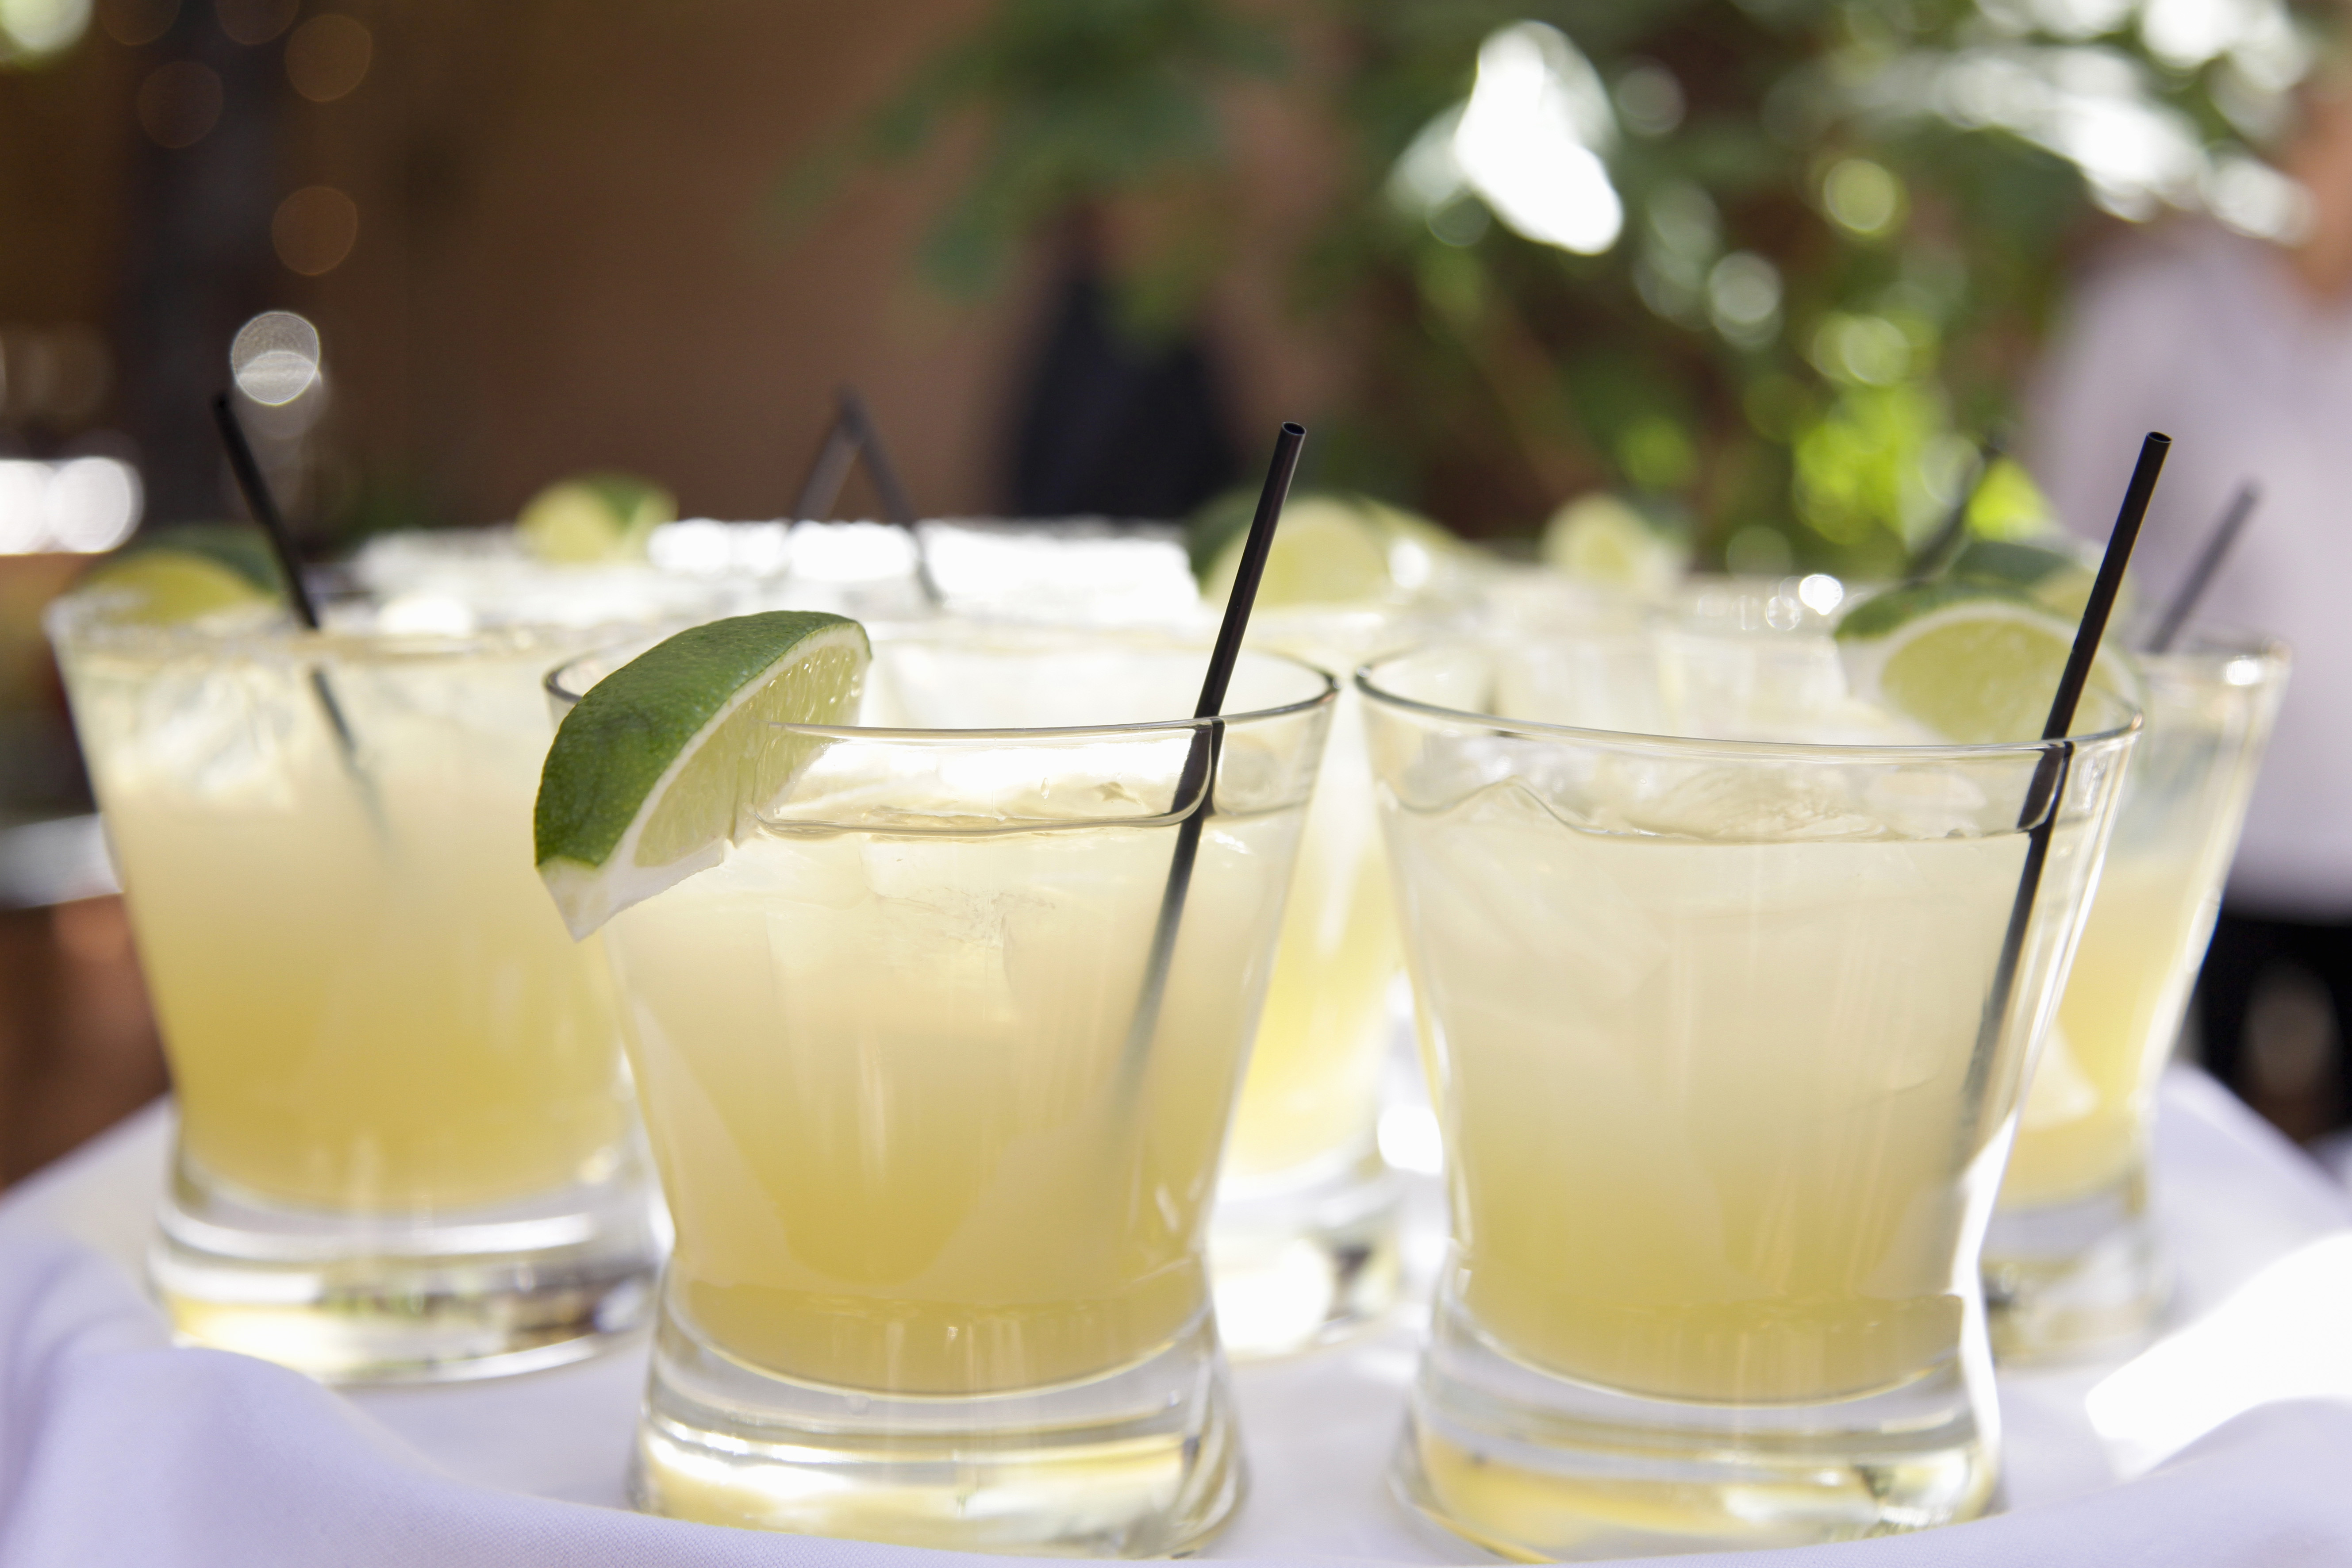 Applebees Is Offering $1 Margaritas All Month. How to Get It | Money